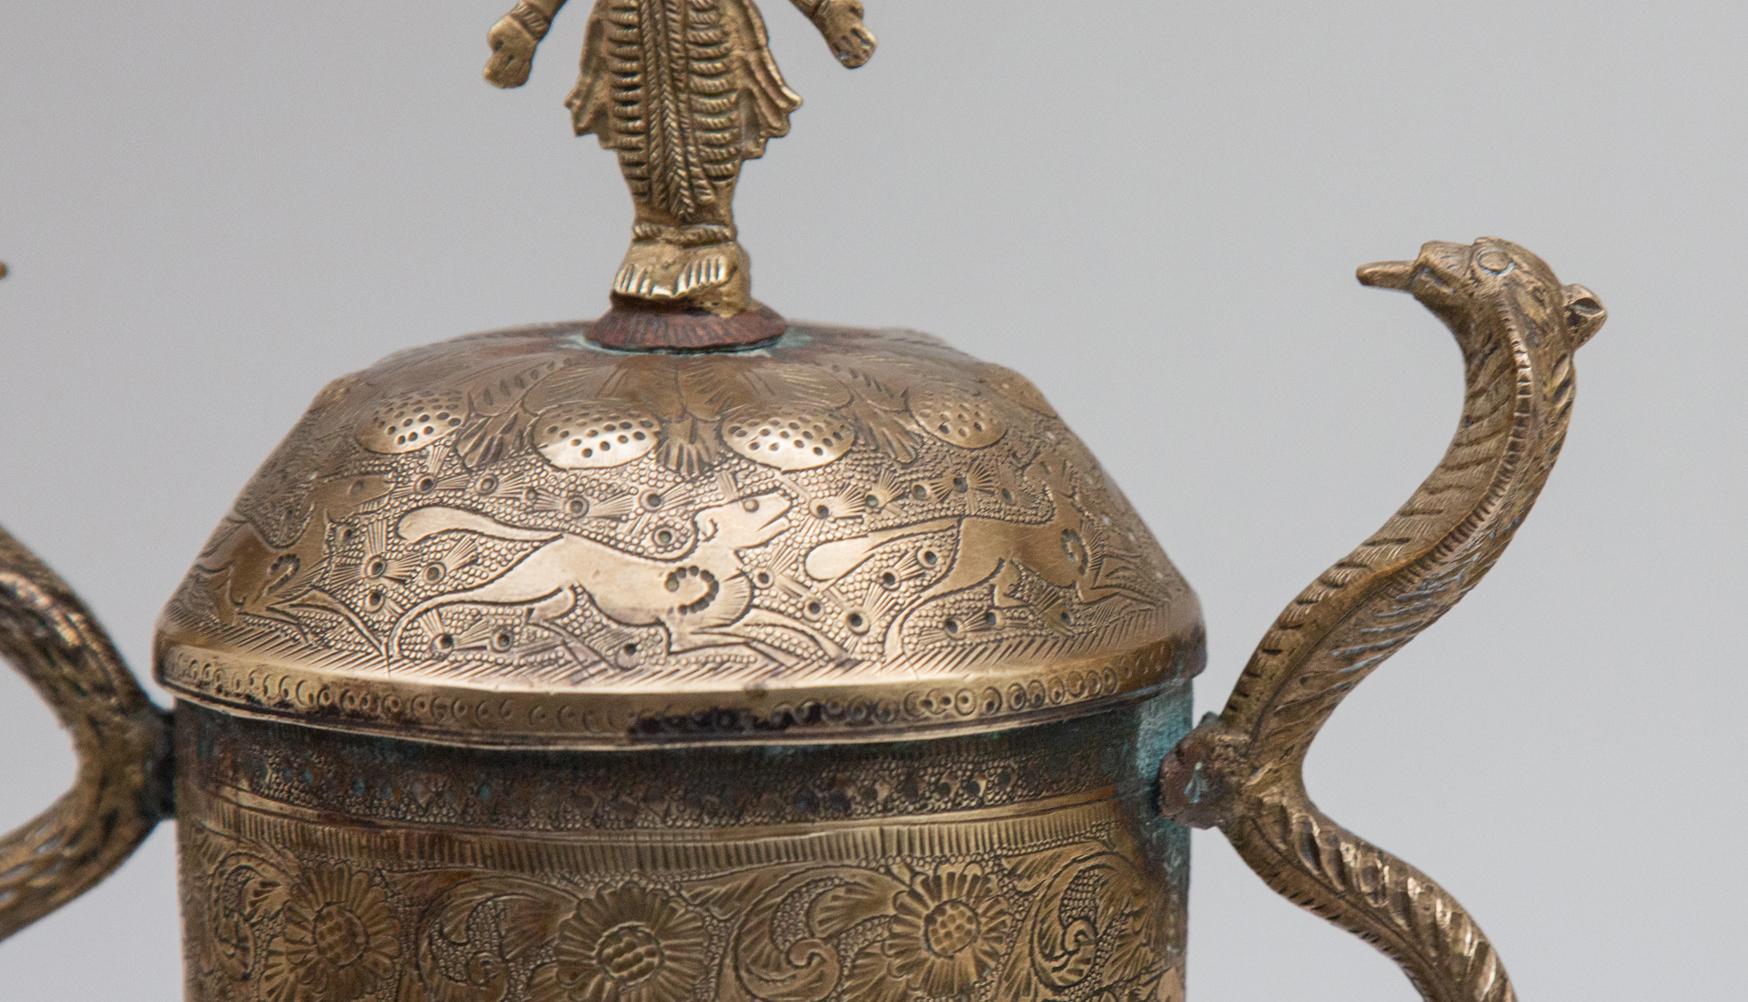 Indian covered brass urn with deity and serpent handles. Two handles made of cobras, engraved with dogs, flowers, and foliage. Topped with four-armed deity. Measures: 13